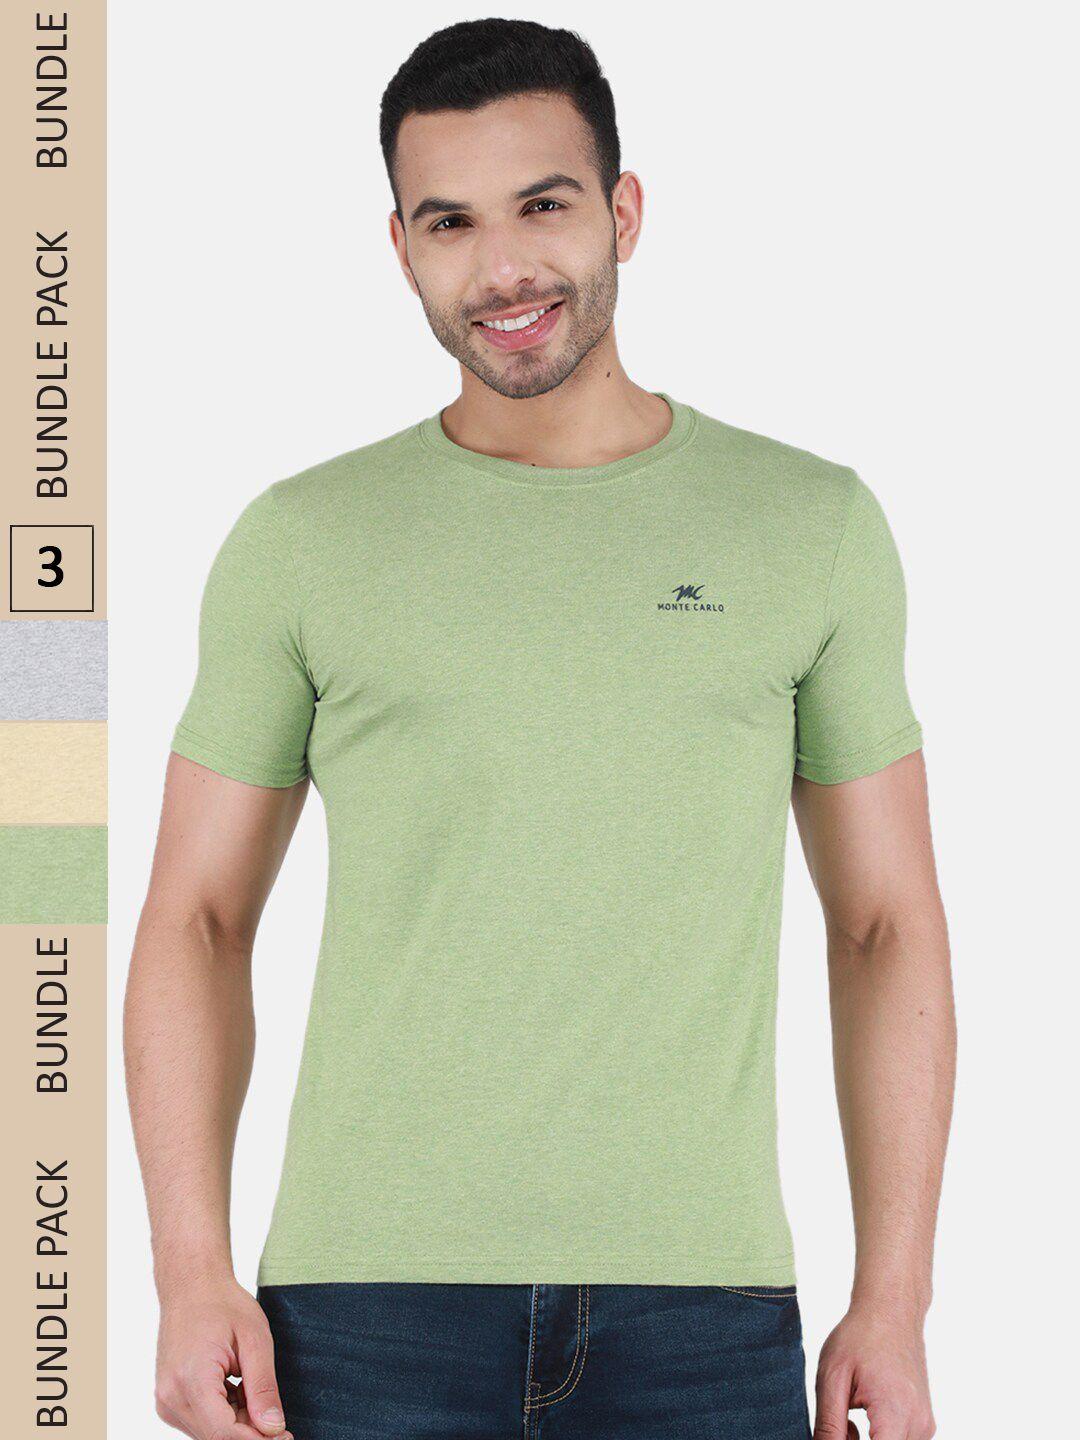 monte-carlo-pack-of-3-round-neck-cotton-t-shirt